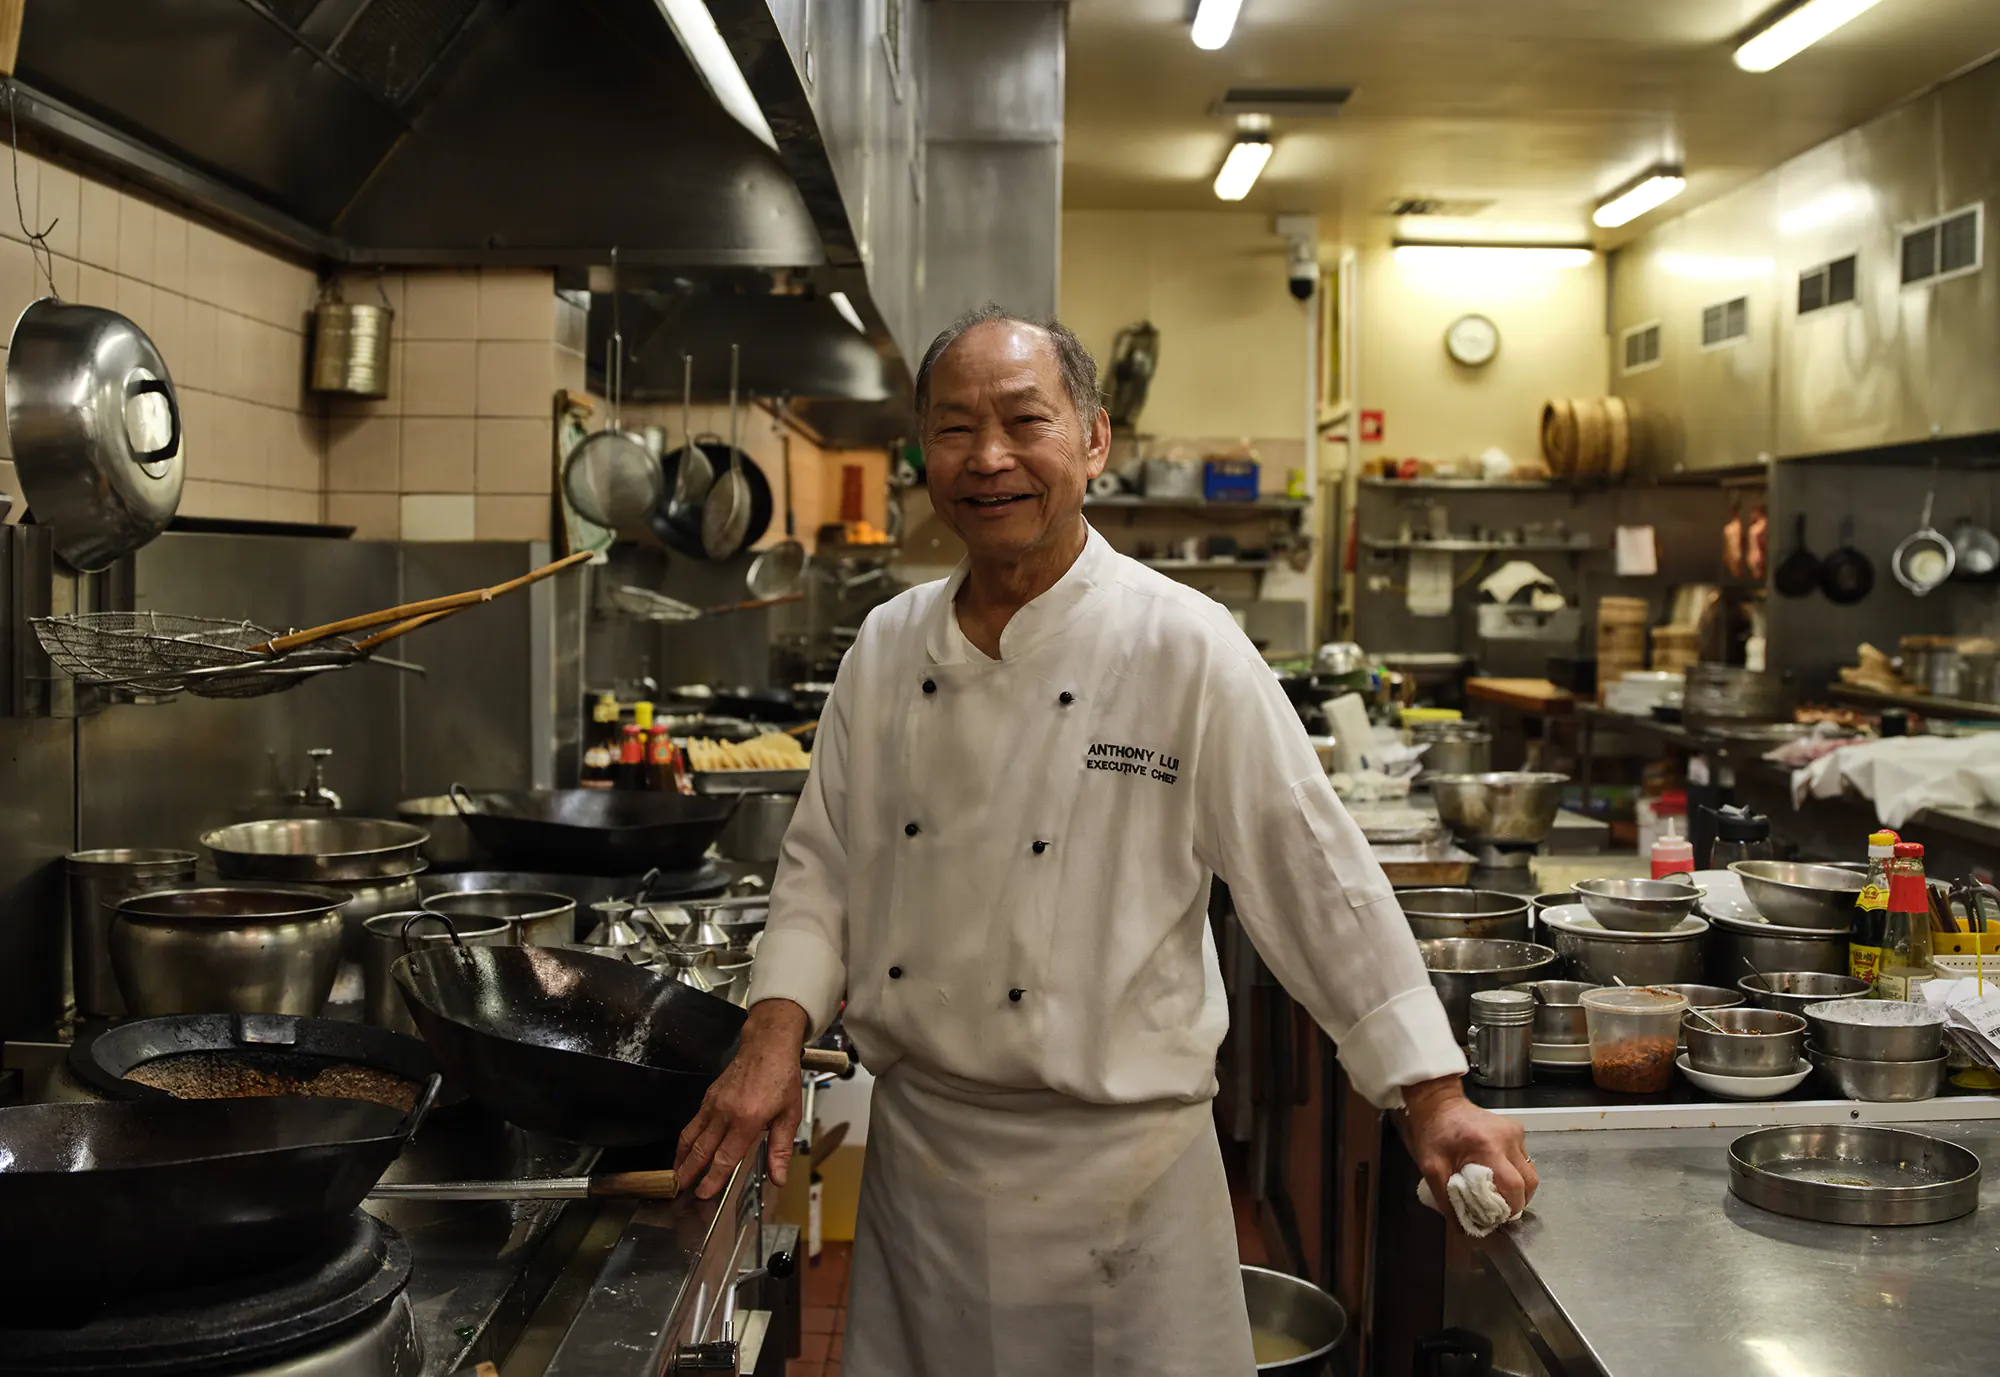 Anthony Lui moved to Australia from Hong Kong in 1980 to work in the Flower Drum kitchen - where he continues to work to this day